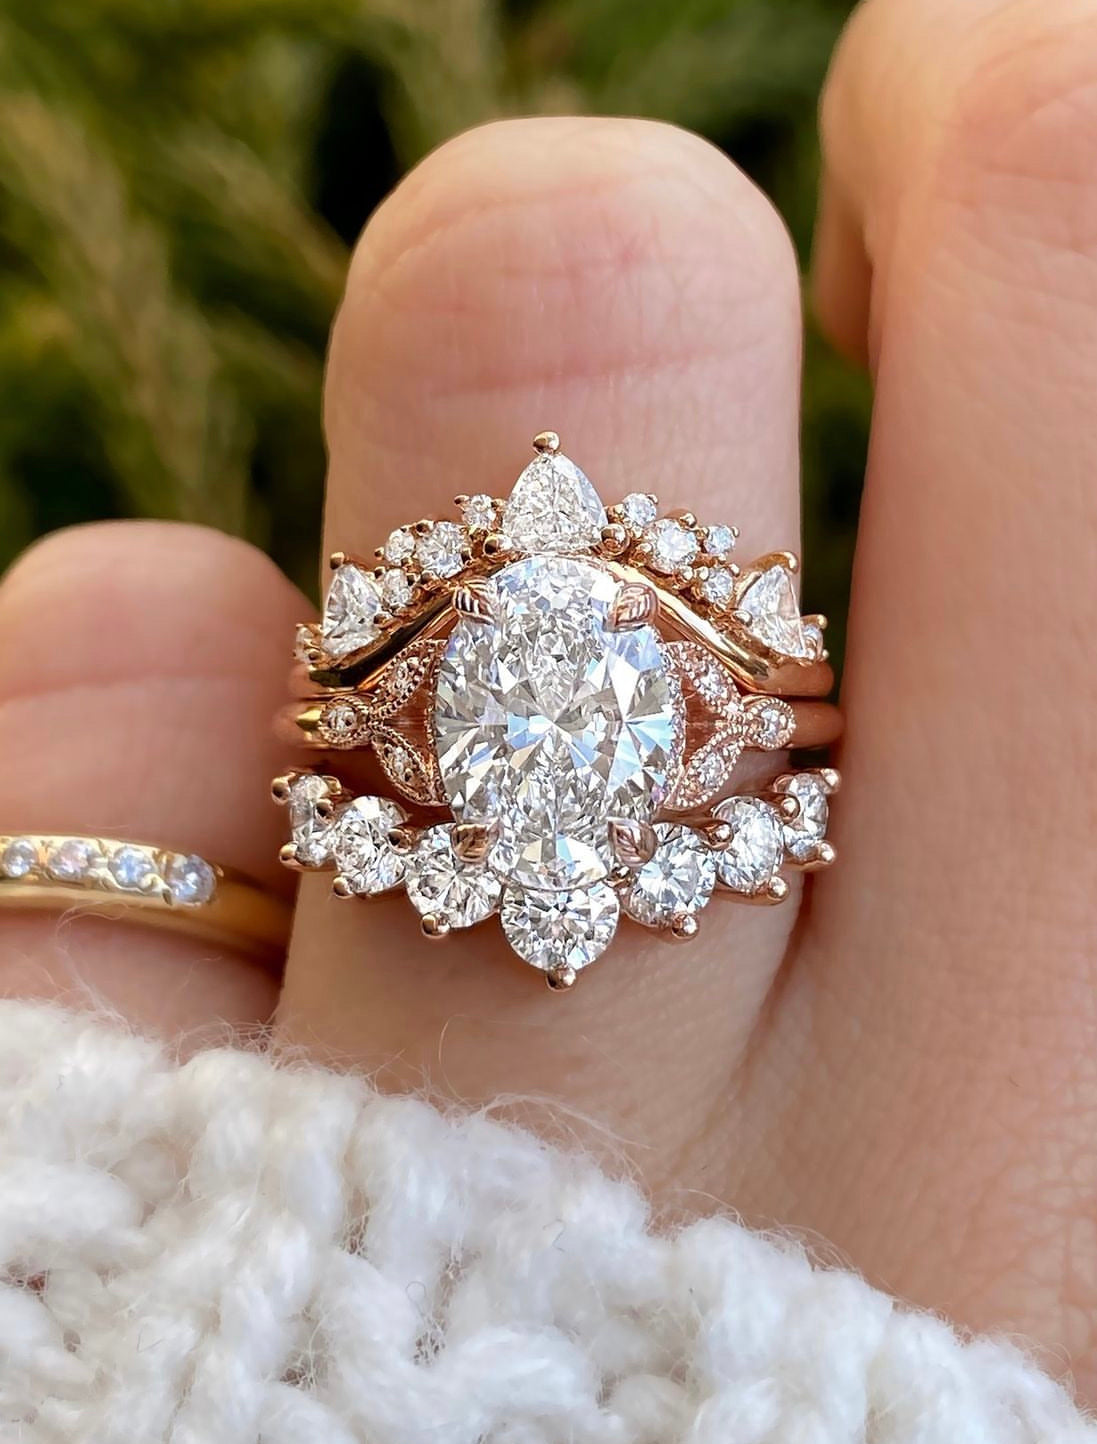 caption:2.25ct oval diamond in rose gold paired with Tempest and Antoinette Large wedding bands